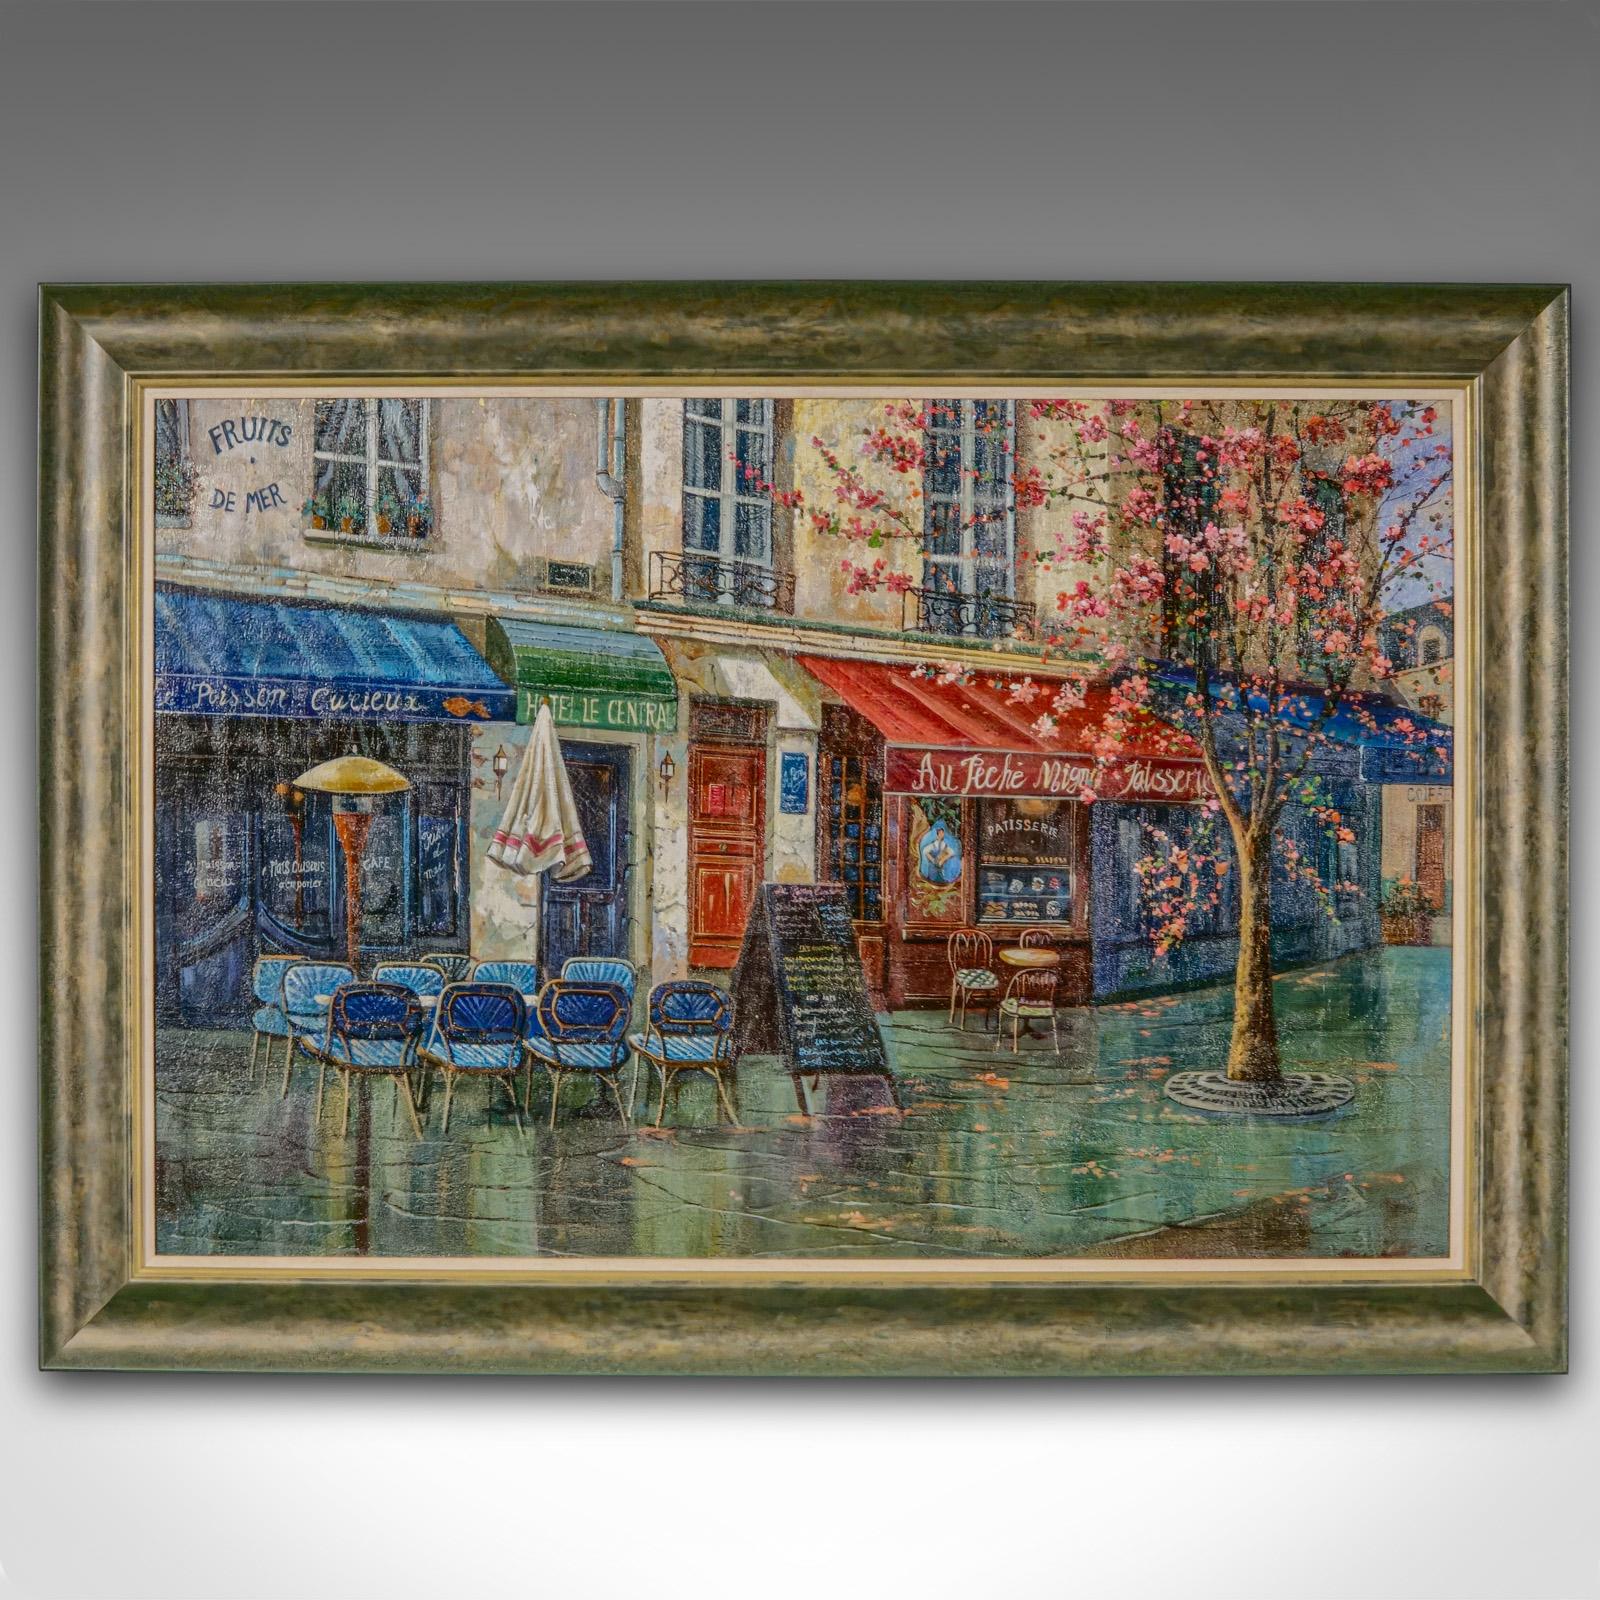 This is a large vintage oil on canvas of a Paris. An unsigned Parisian street scene in quality frame, dating to the late 20th century.

Charmingly evocative street scene of a rain slick Parisian walkway
Presented in a quality later frame with broad,